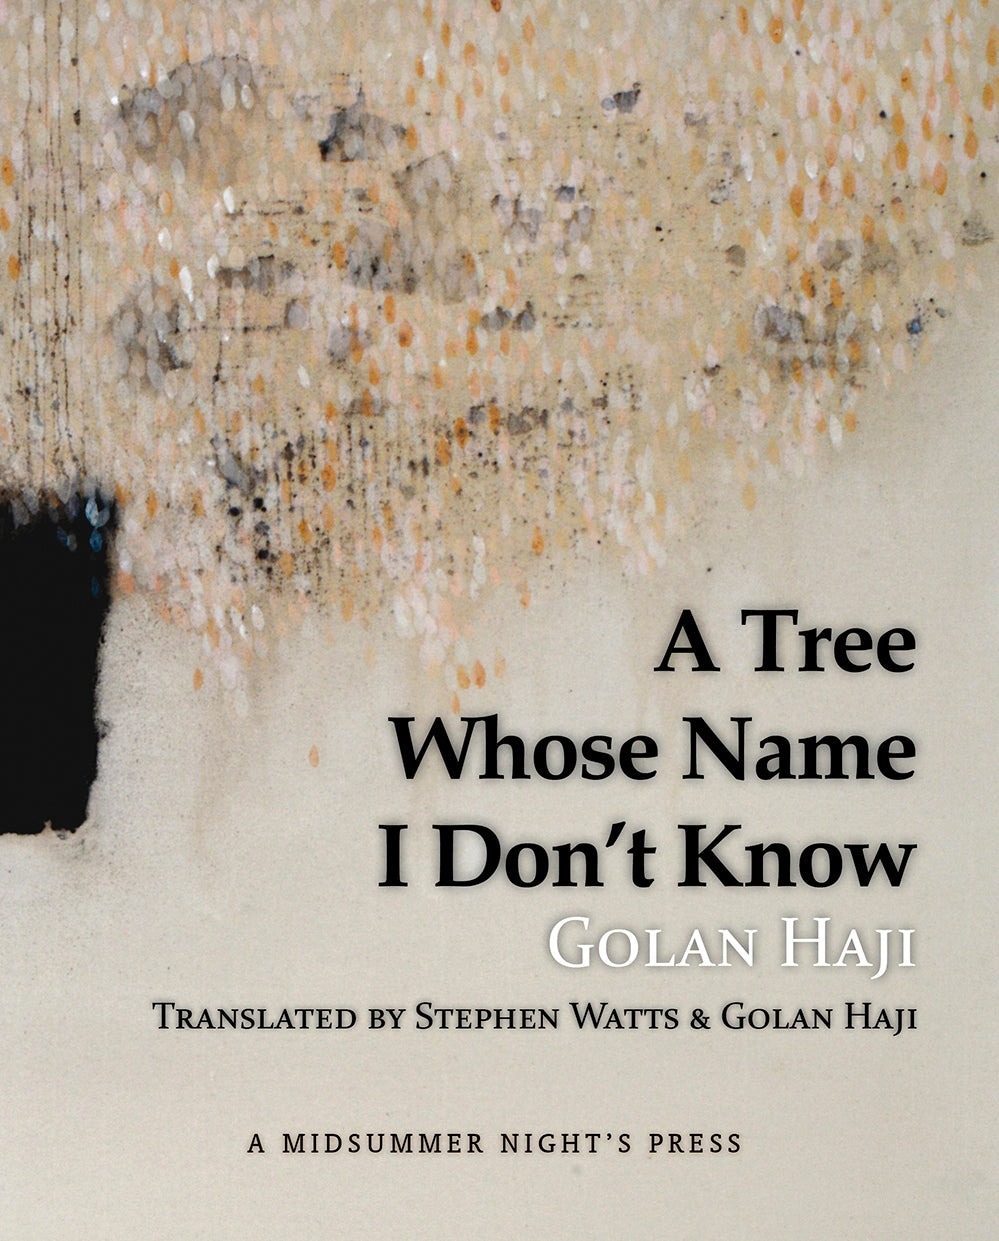 A Tree Whose Name I Don’t Know by Golan Haji